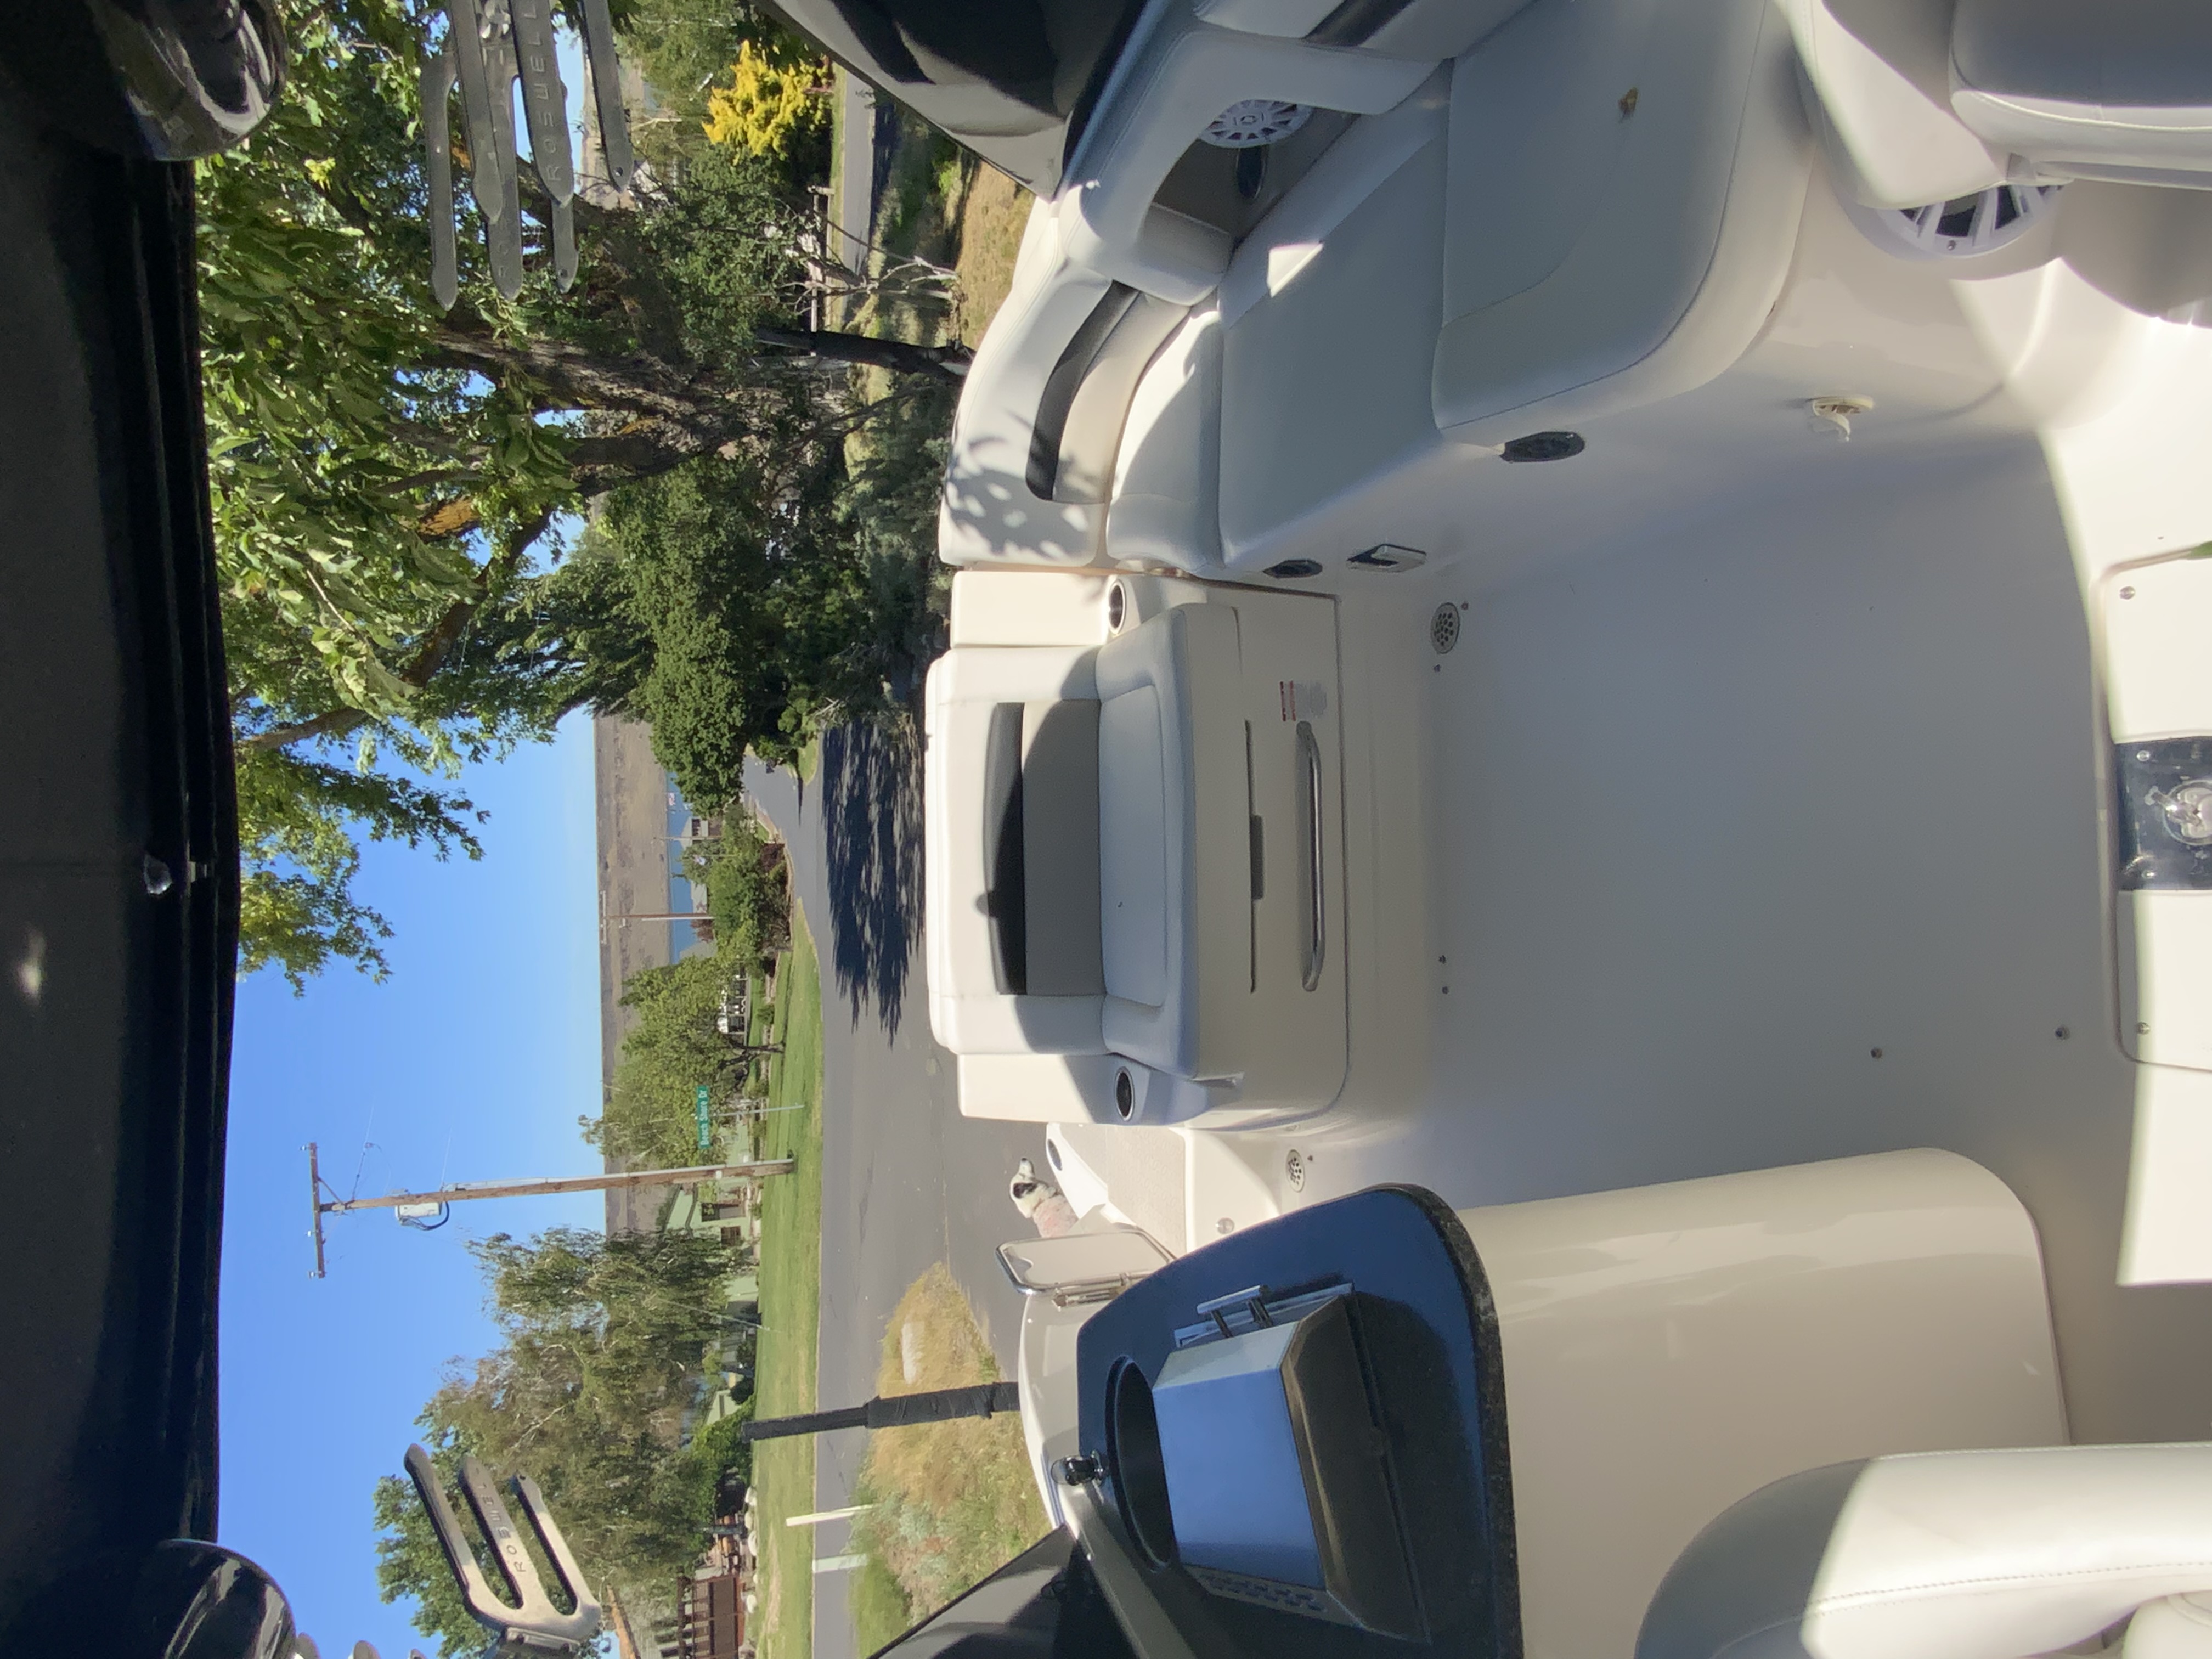 2008 Chaparral 264 Sunesta Power boat for sale in Hermiston, OR - image 9 